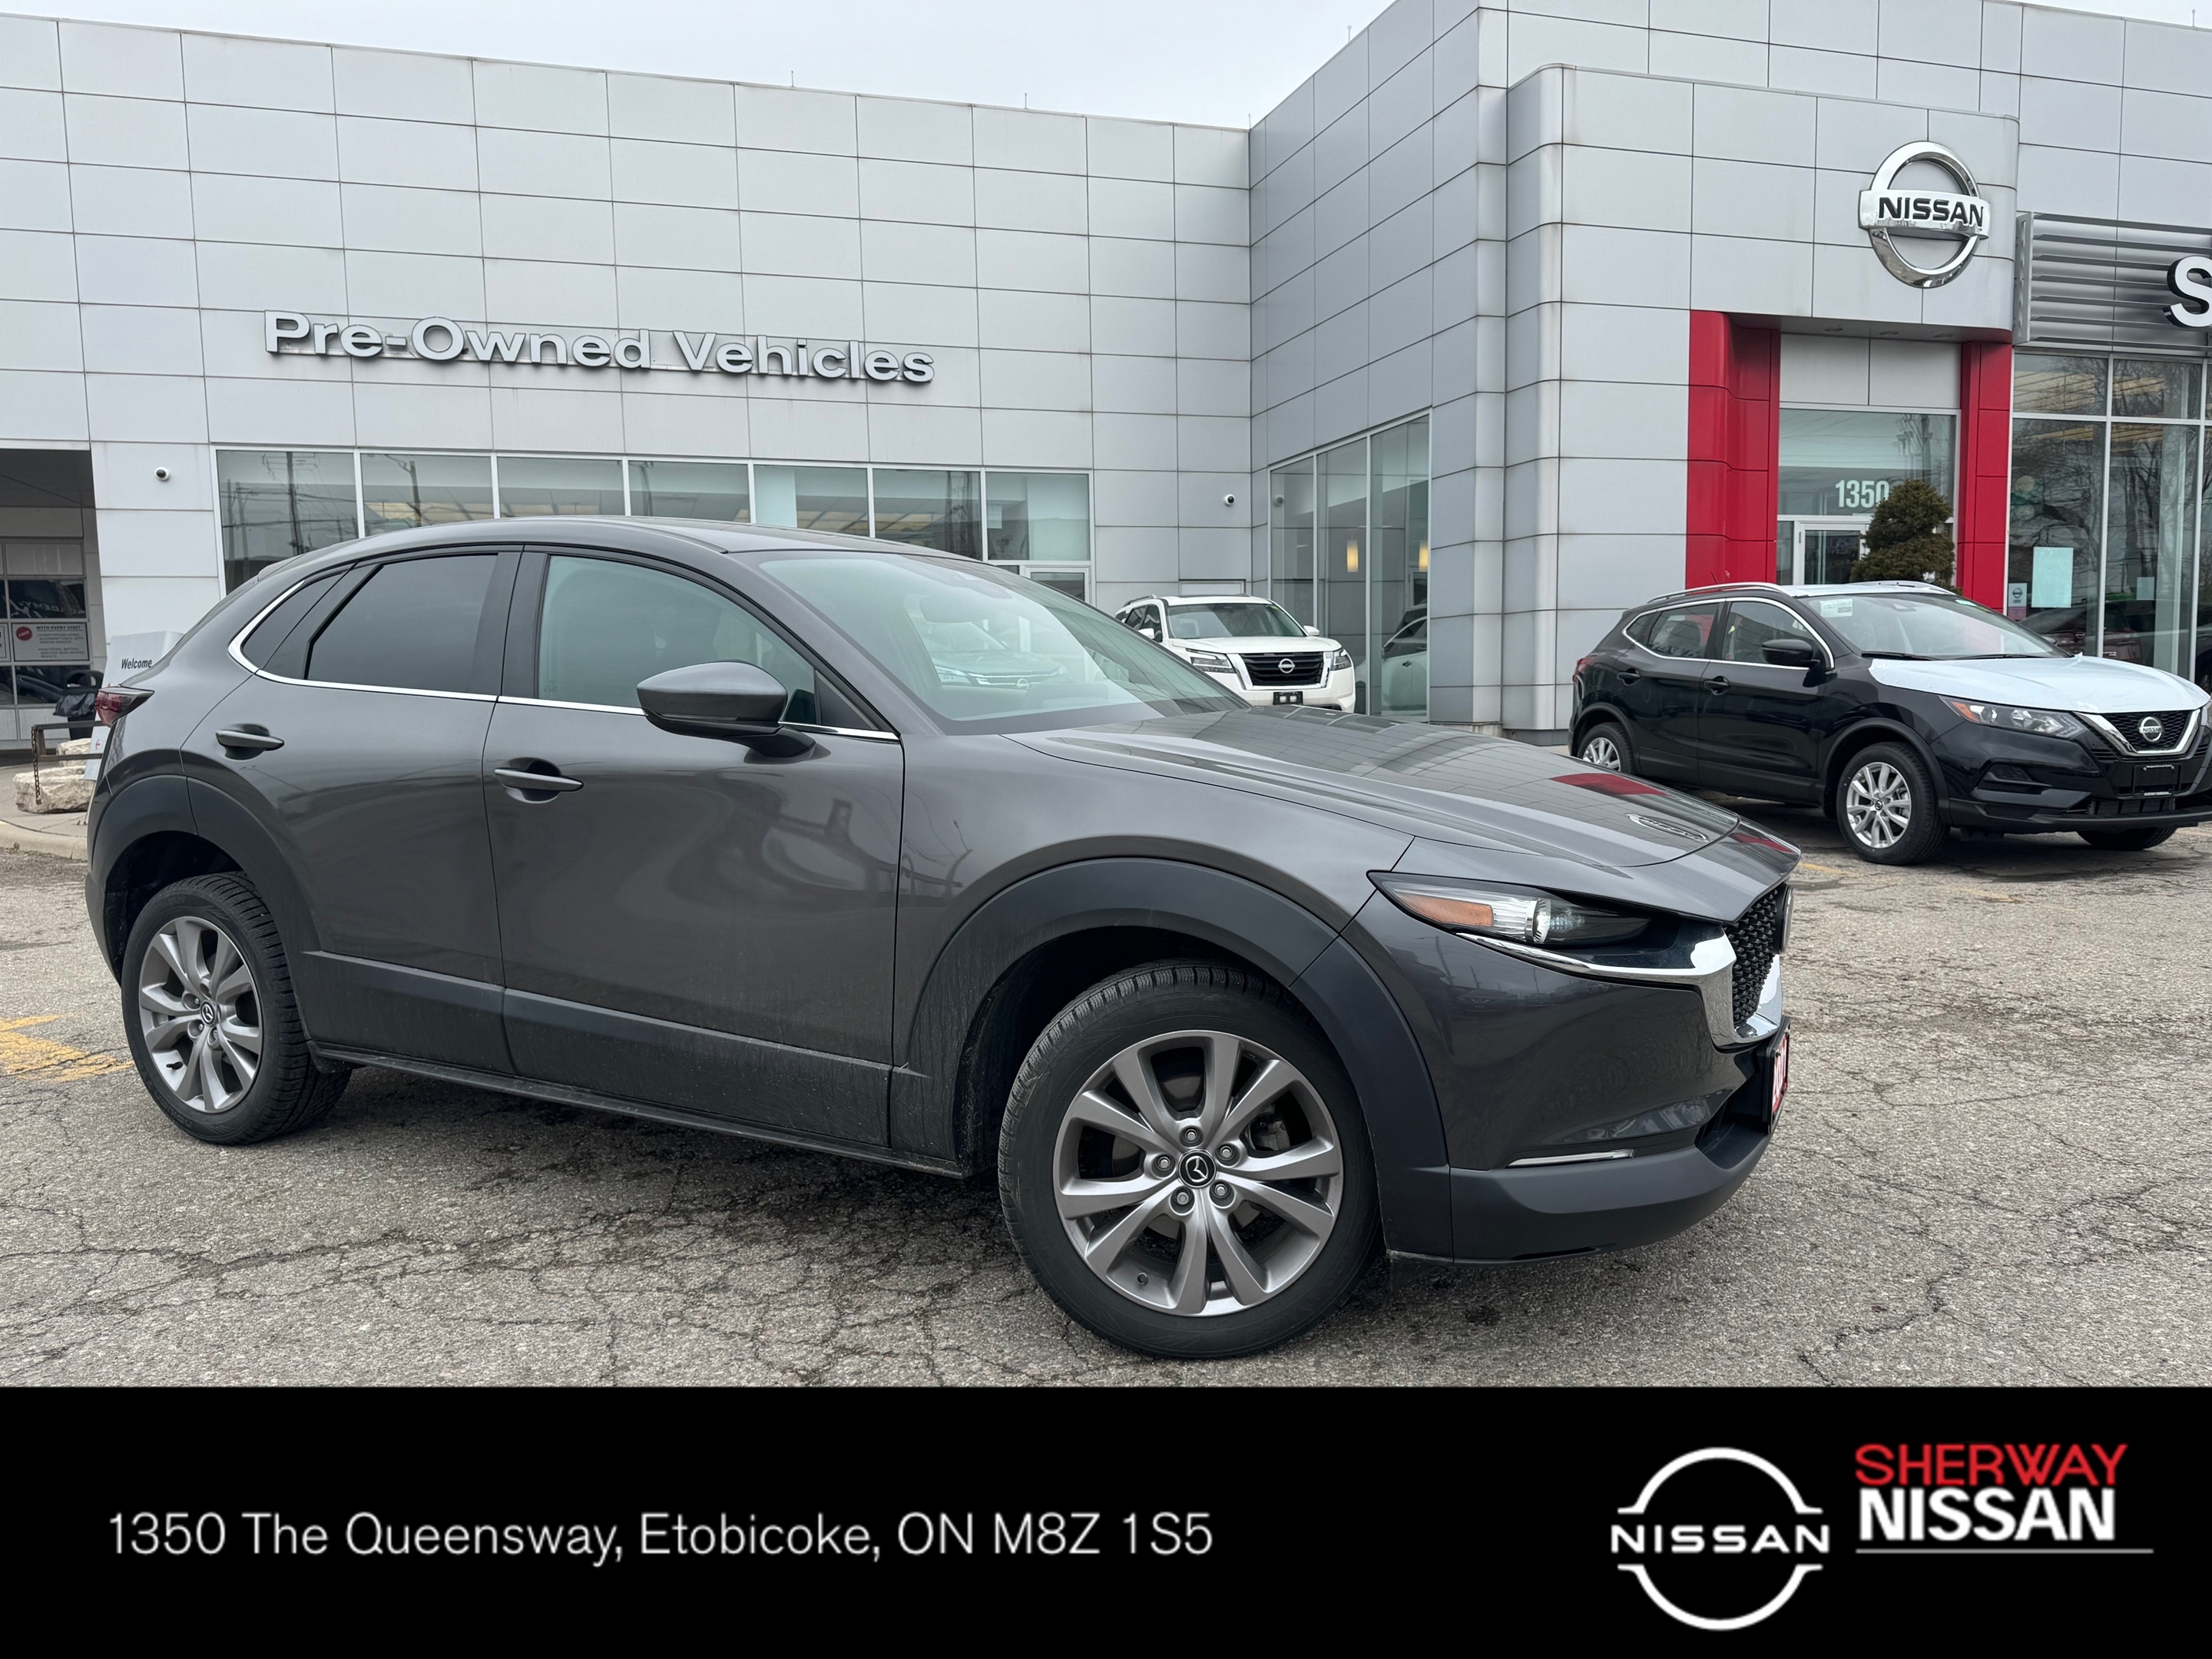 2021 Mazda CX-30 LOW KM (40401KMS) MAZDA CX-30 GS AWD  ONE OWNER TR